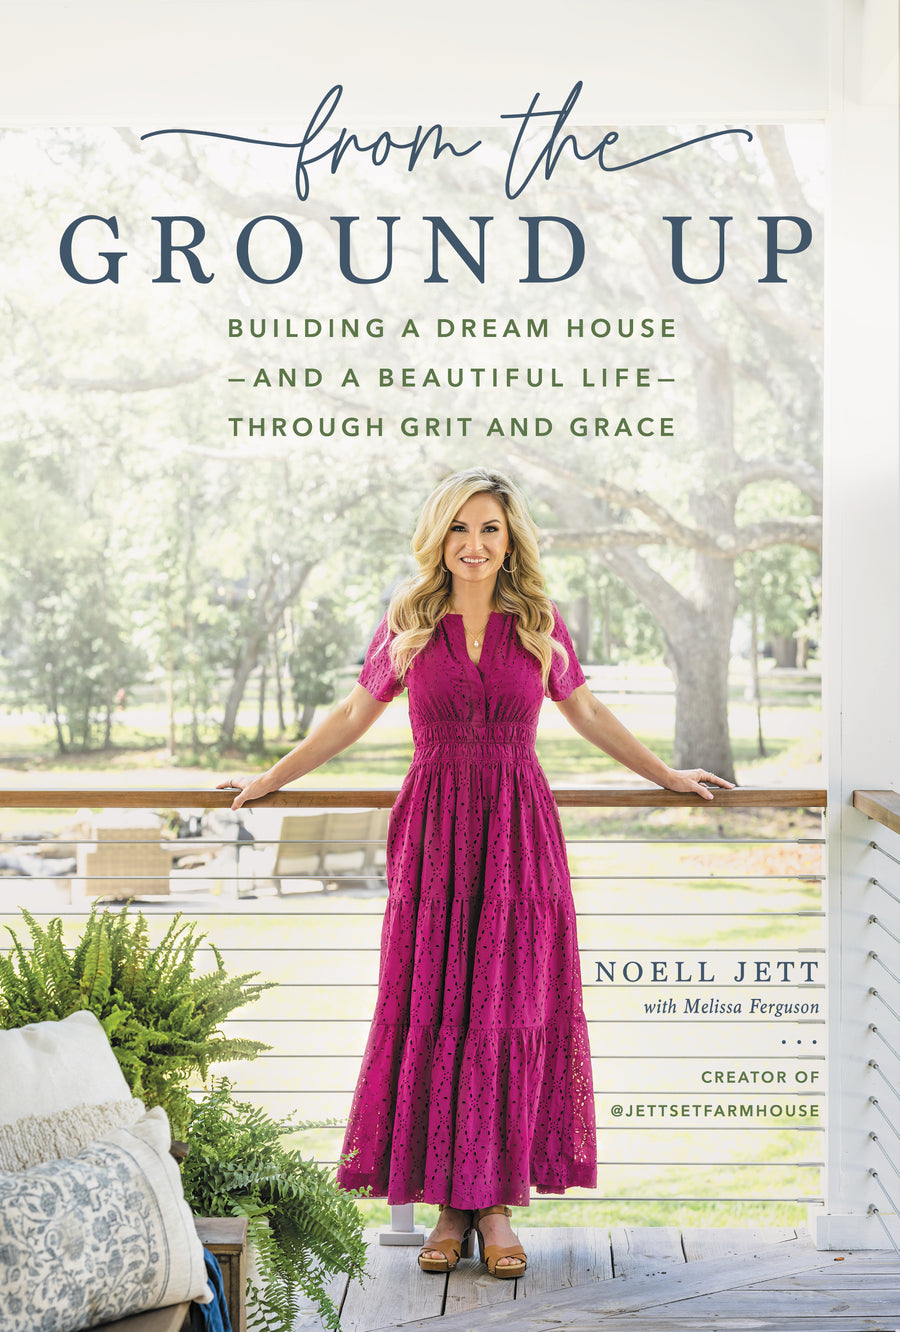 From The Ground Up by Noell Jett